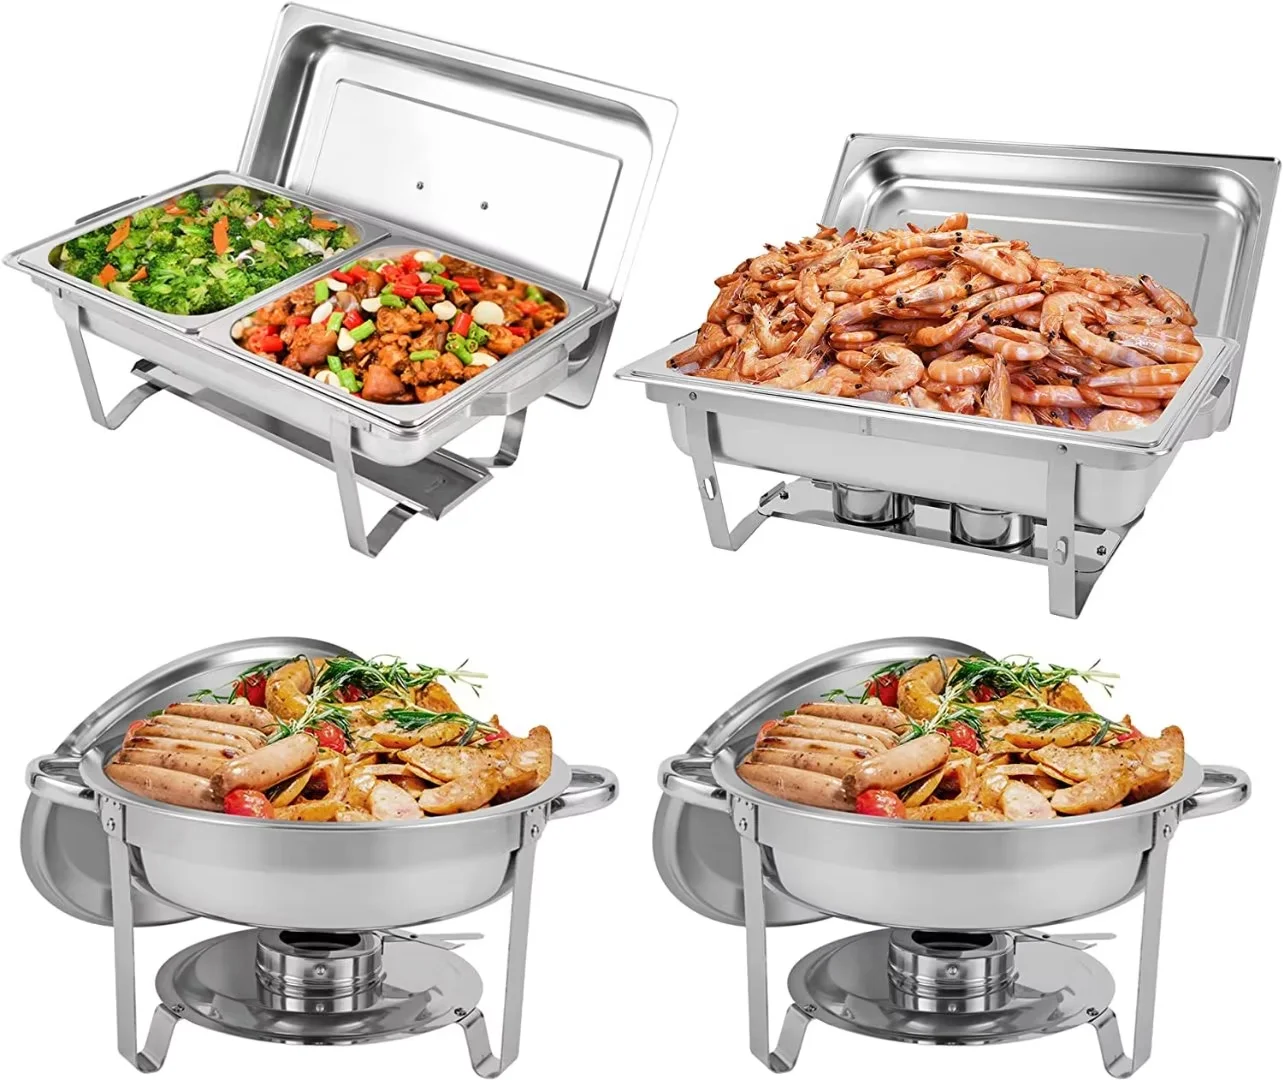 HORESTKIT Chafing Dish Buffet Set 4 Pack, Stainless Steel 5 QT Round ...